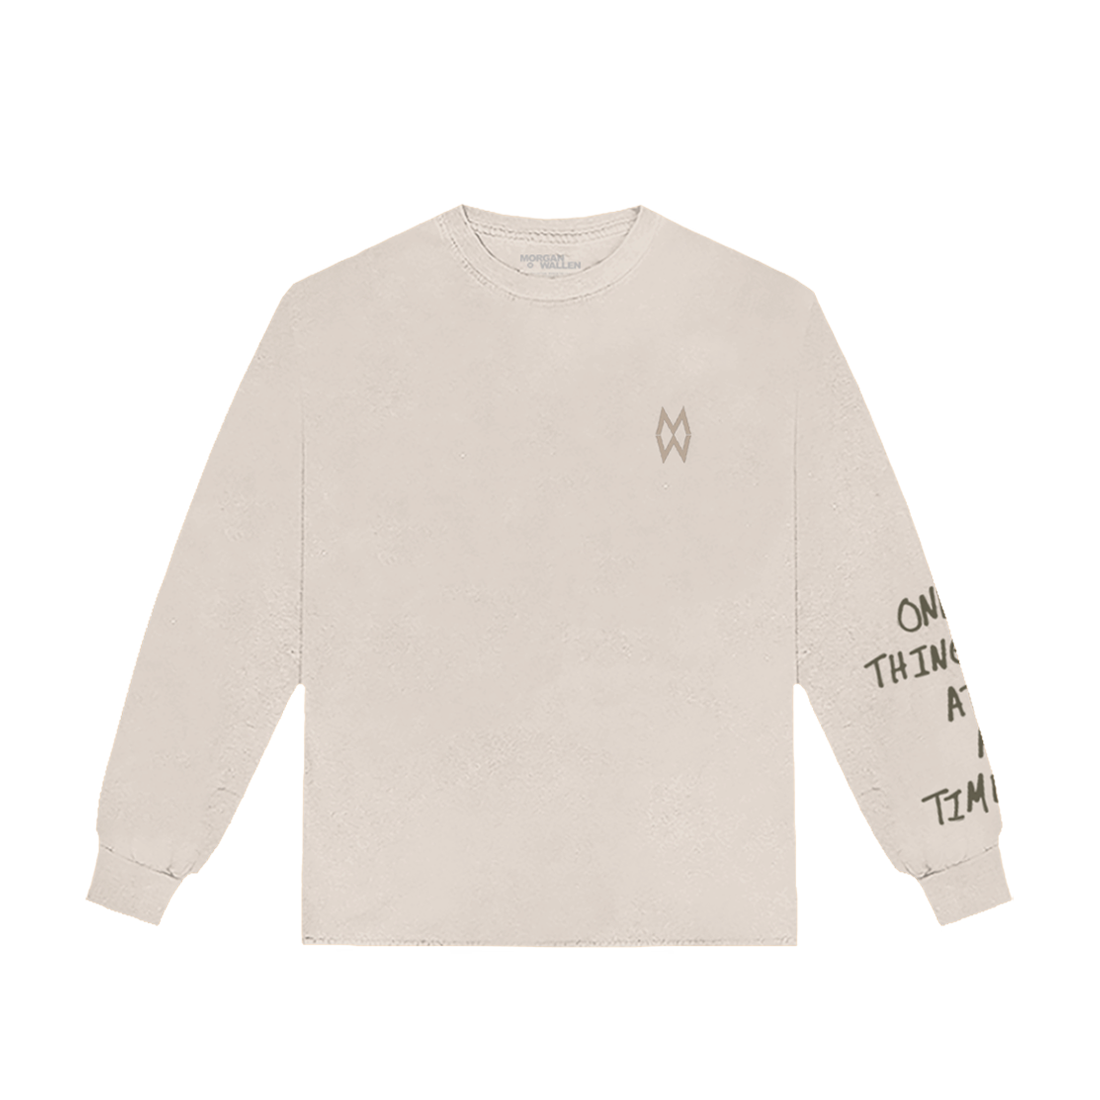 One Thing At A Time Album Cover Off-White Long Sleeve T-Shirt